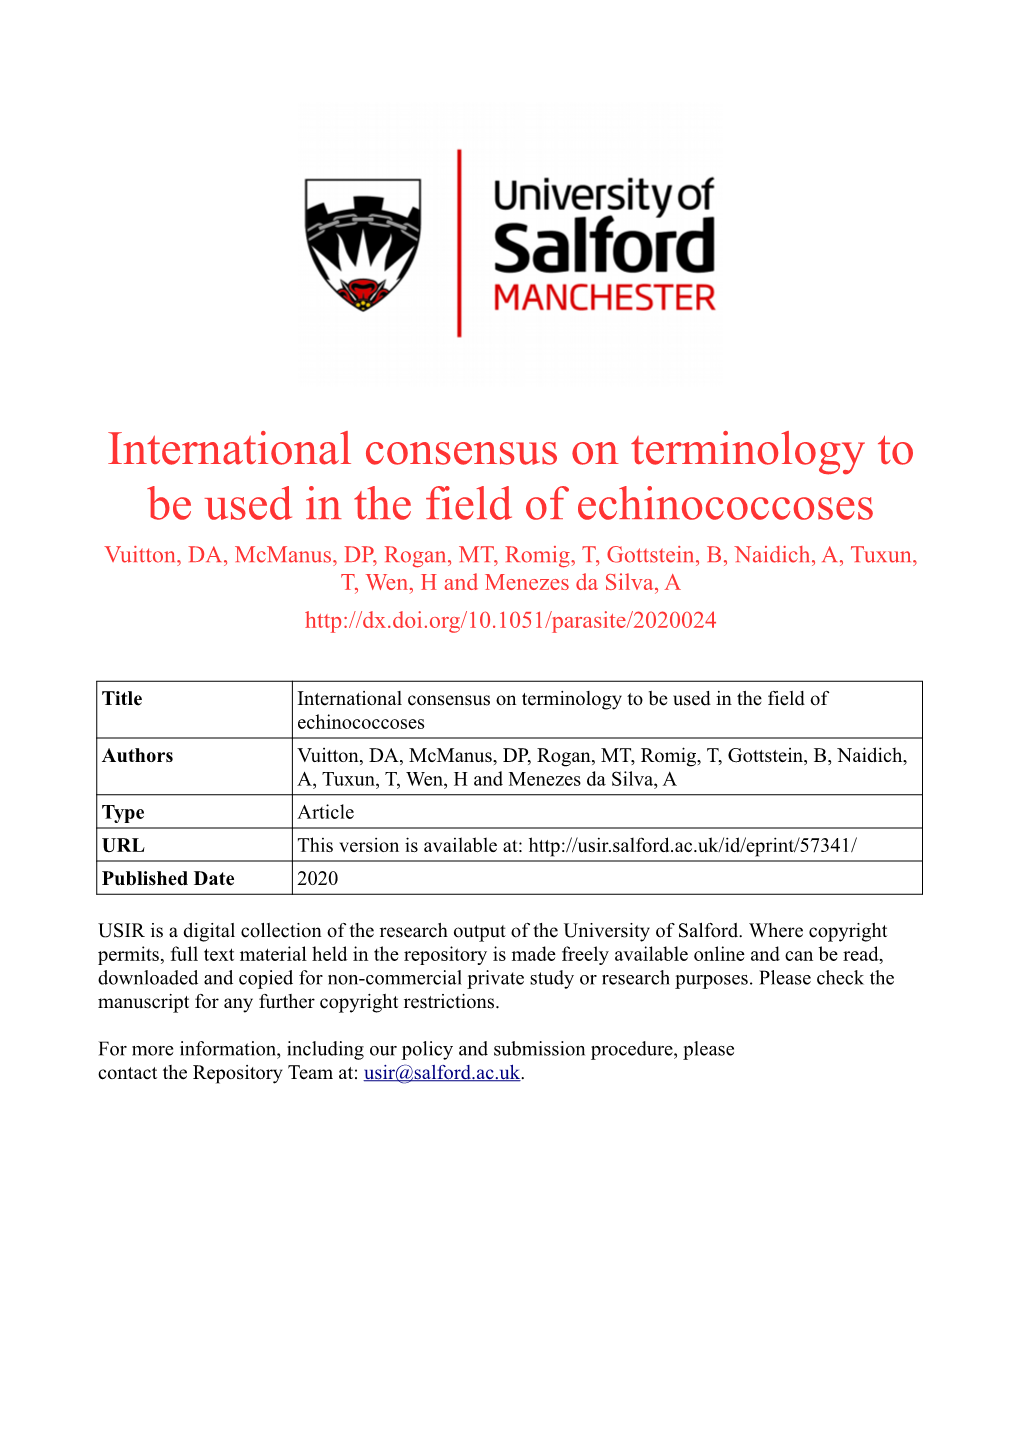 International Consensus on Terminology to Be Used in the Field